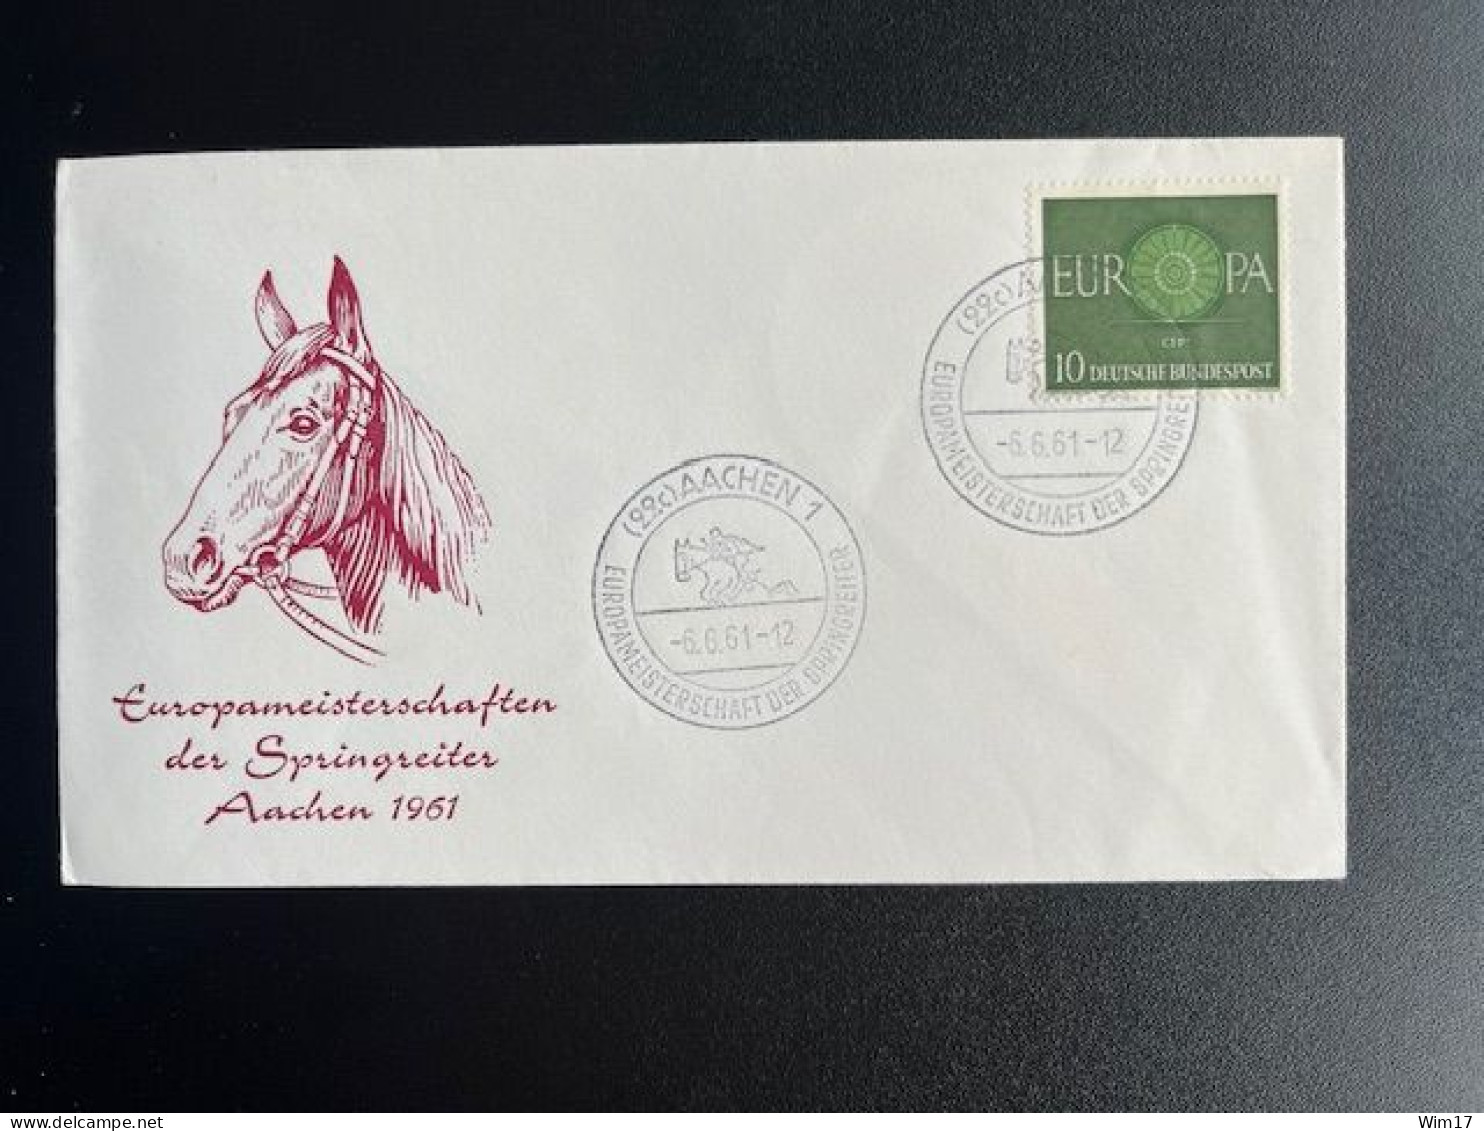 GERMANY 1961 SPECIAL COVER EUROPEAN CHAMPIONSHIP HORSE JUMPING 06-06-1961 DUITSLAND DEUTSCHLAND HORSES - Briefe U. Dokumente